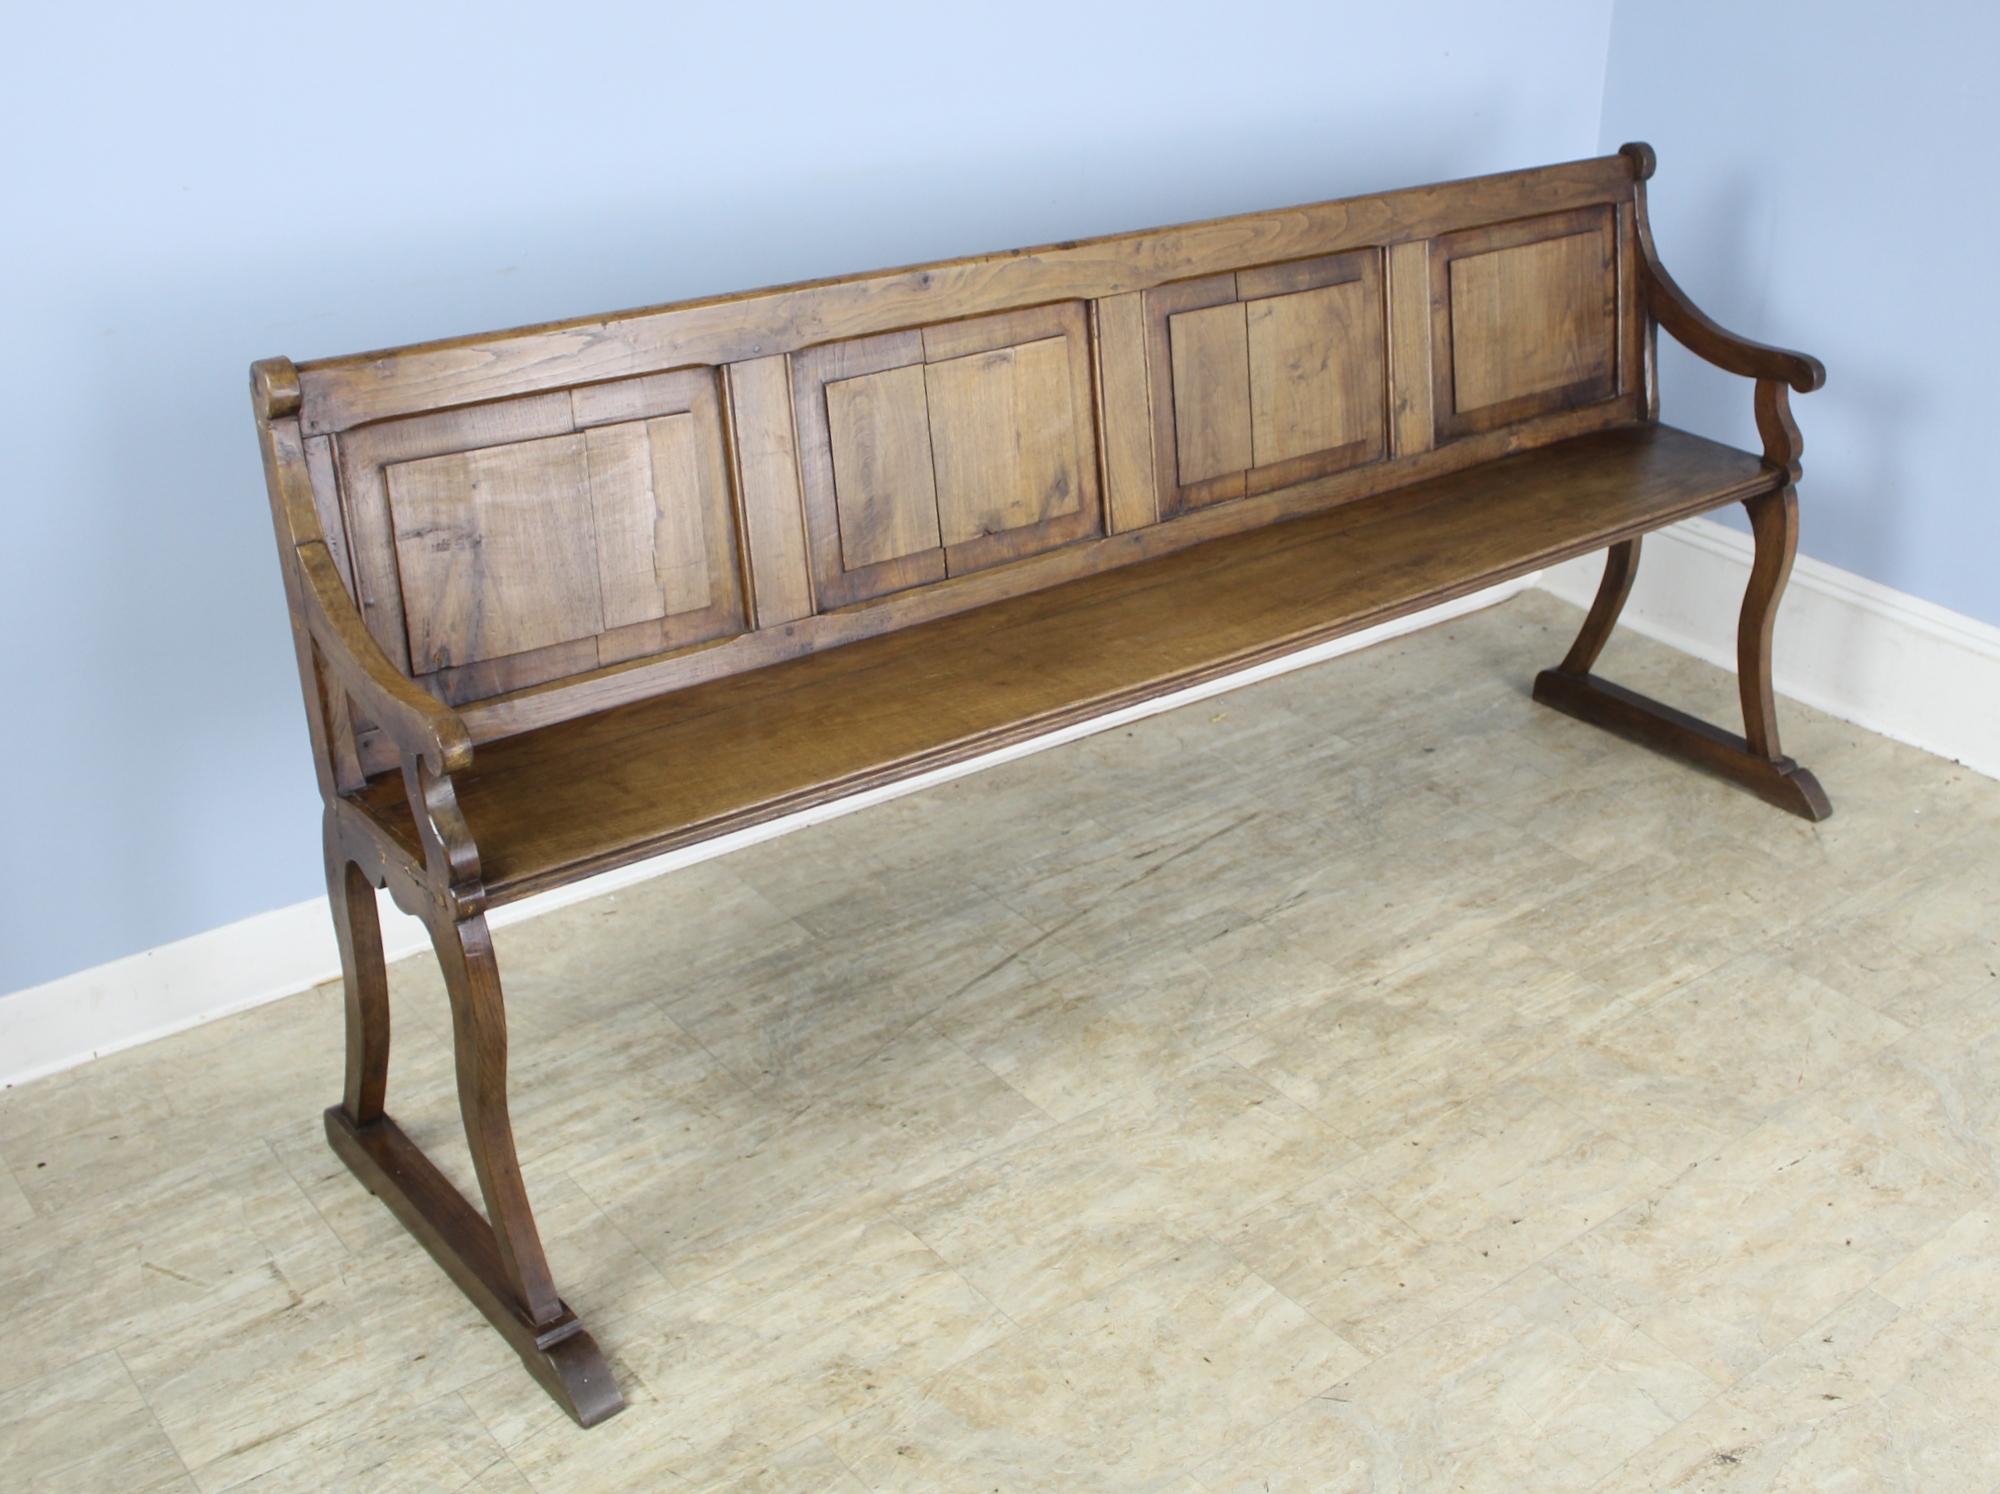 Slim and elegant, this bench is very much in the Victorian style. The color and patina of the chestnut are lovely and the seat height is a comfortable 18.5 inches. Good inset panels on both the front and back. Would be right in the front hall or